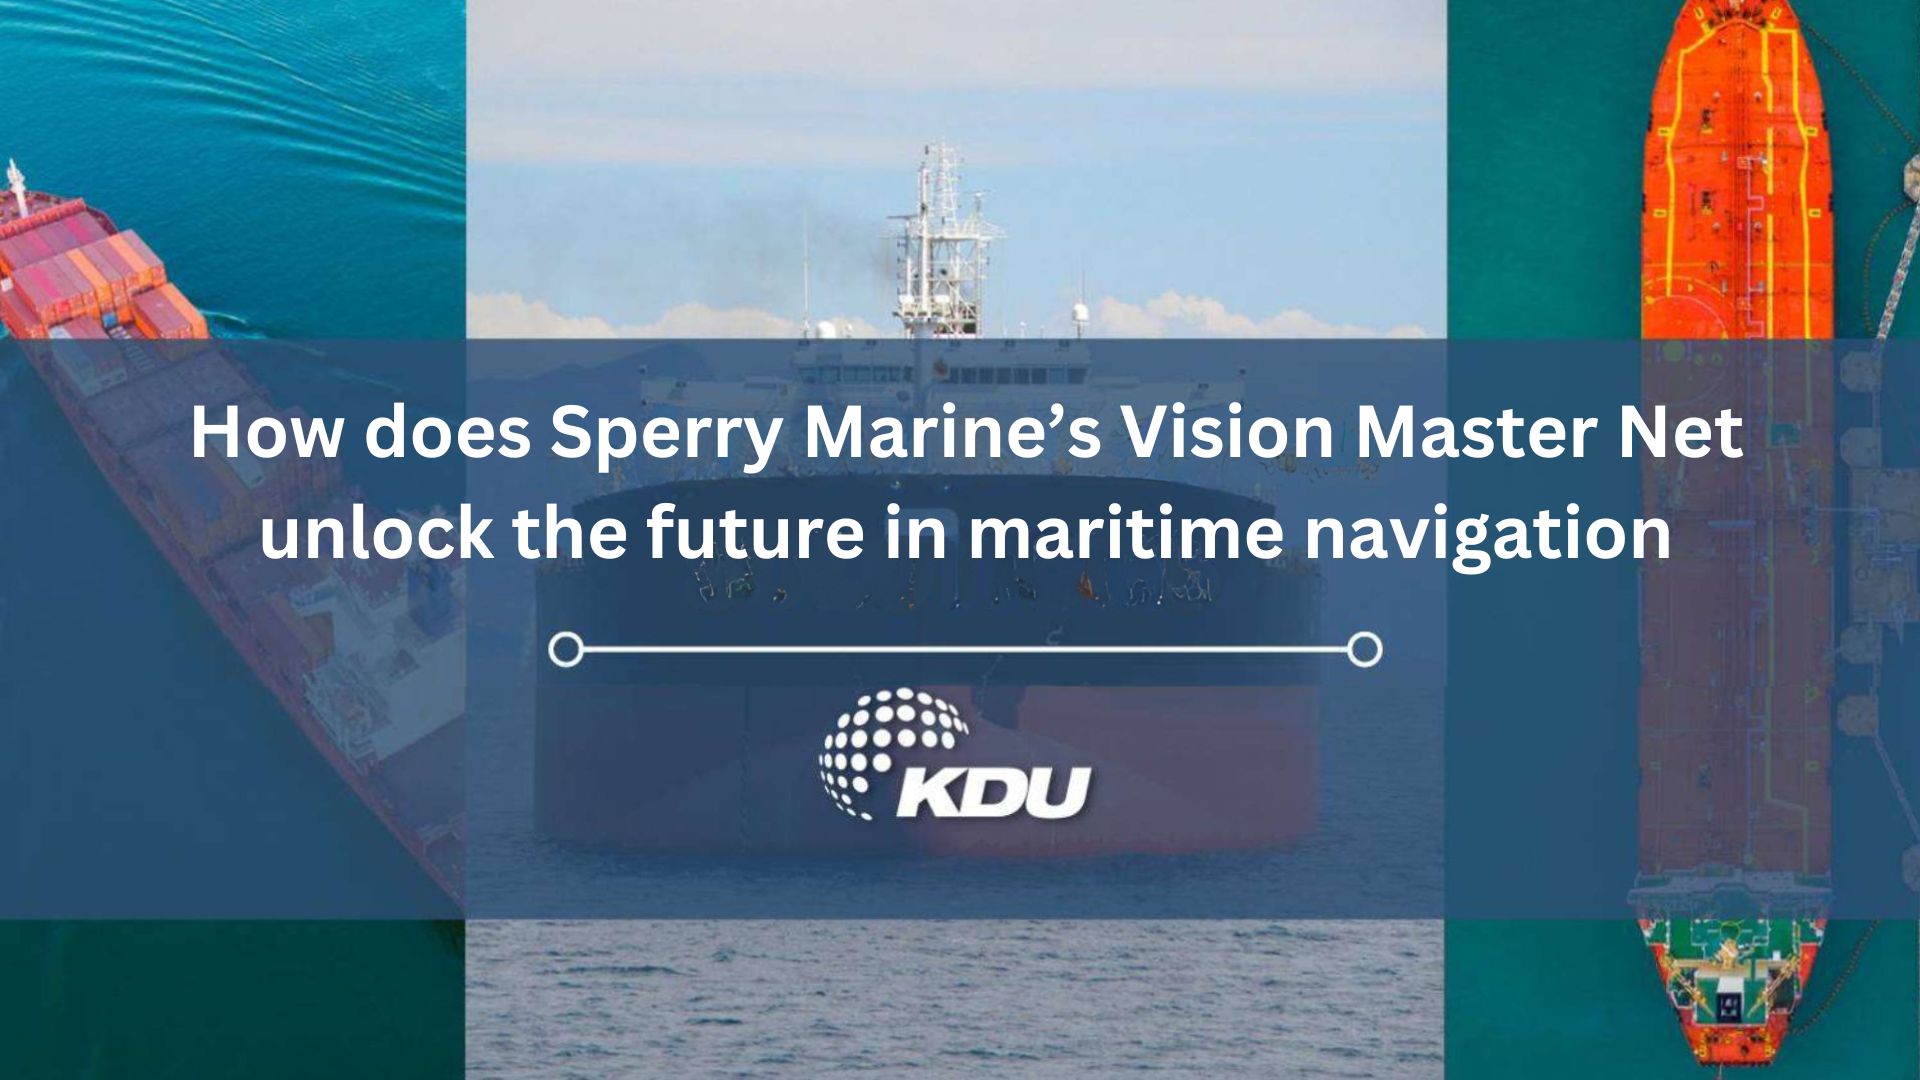 How does Sperry Marine’s Vision Master Net unlock the future in maritime navigation?